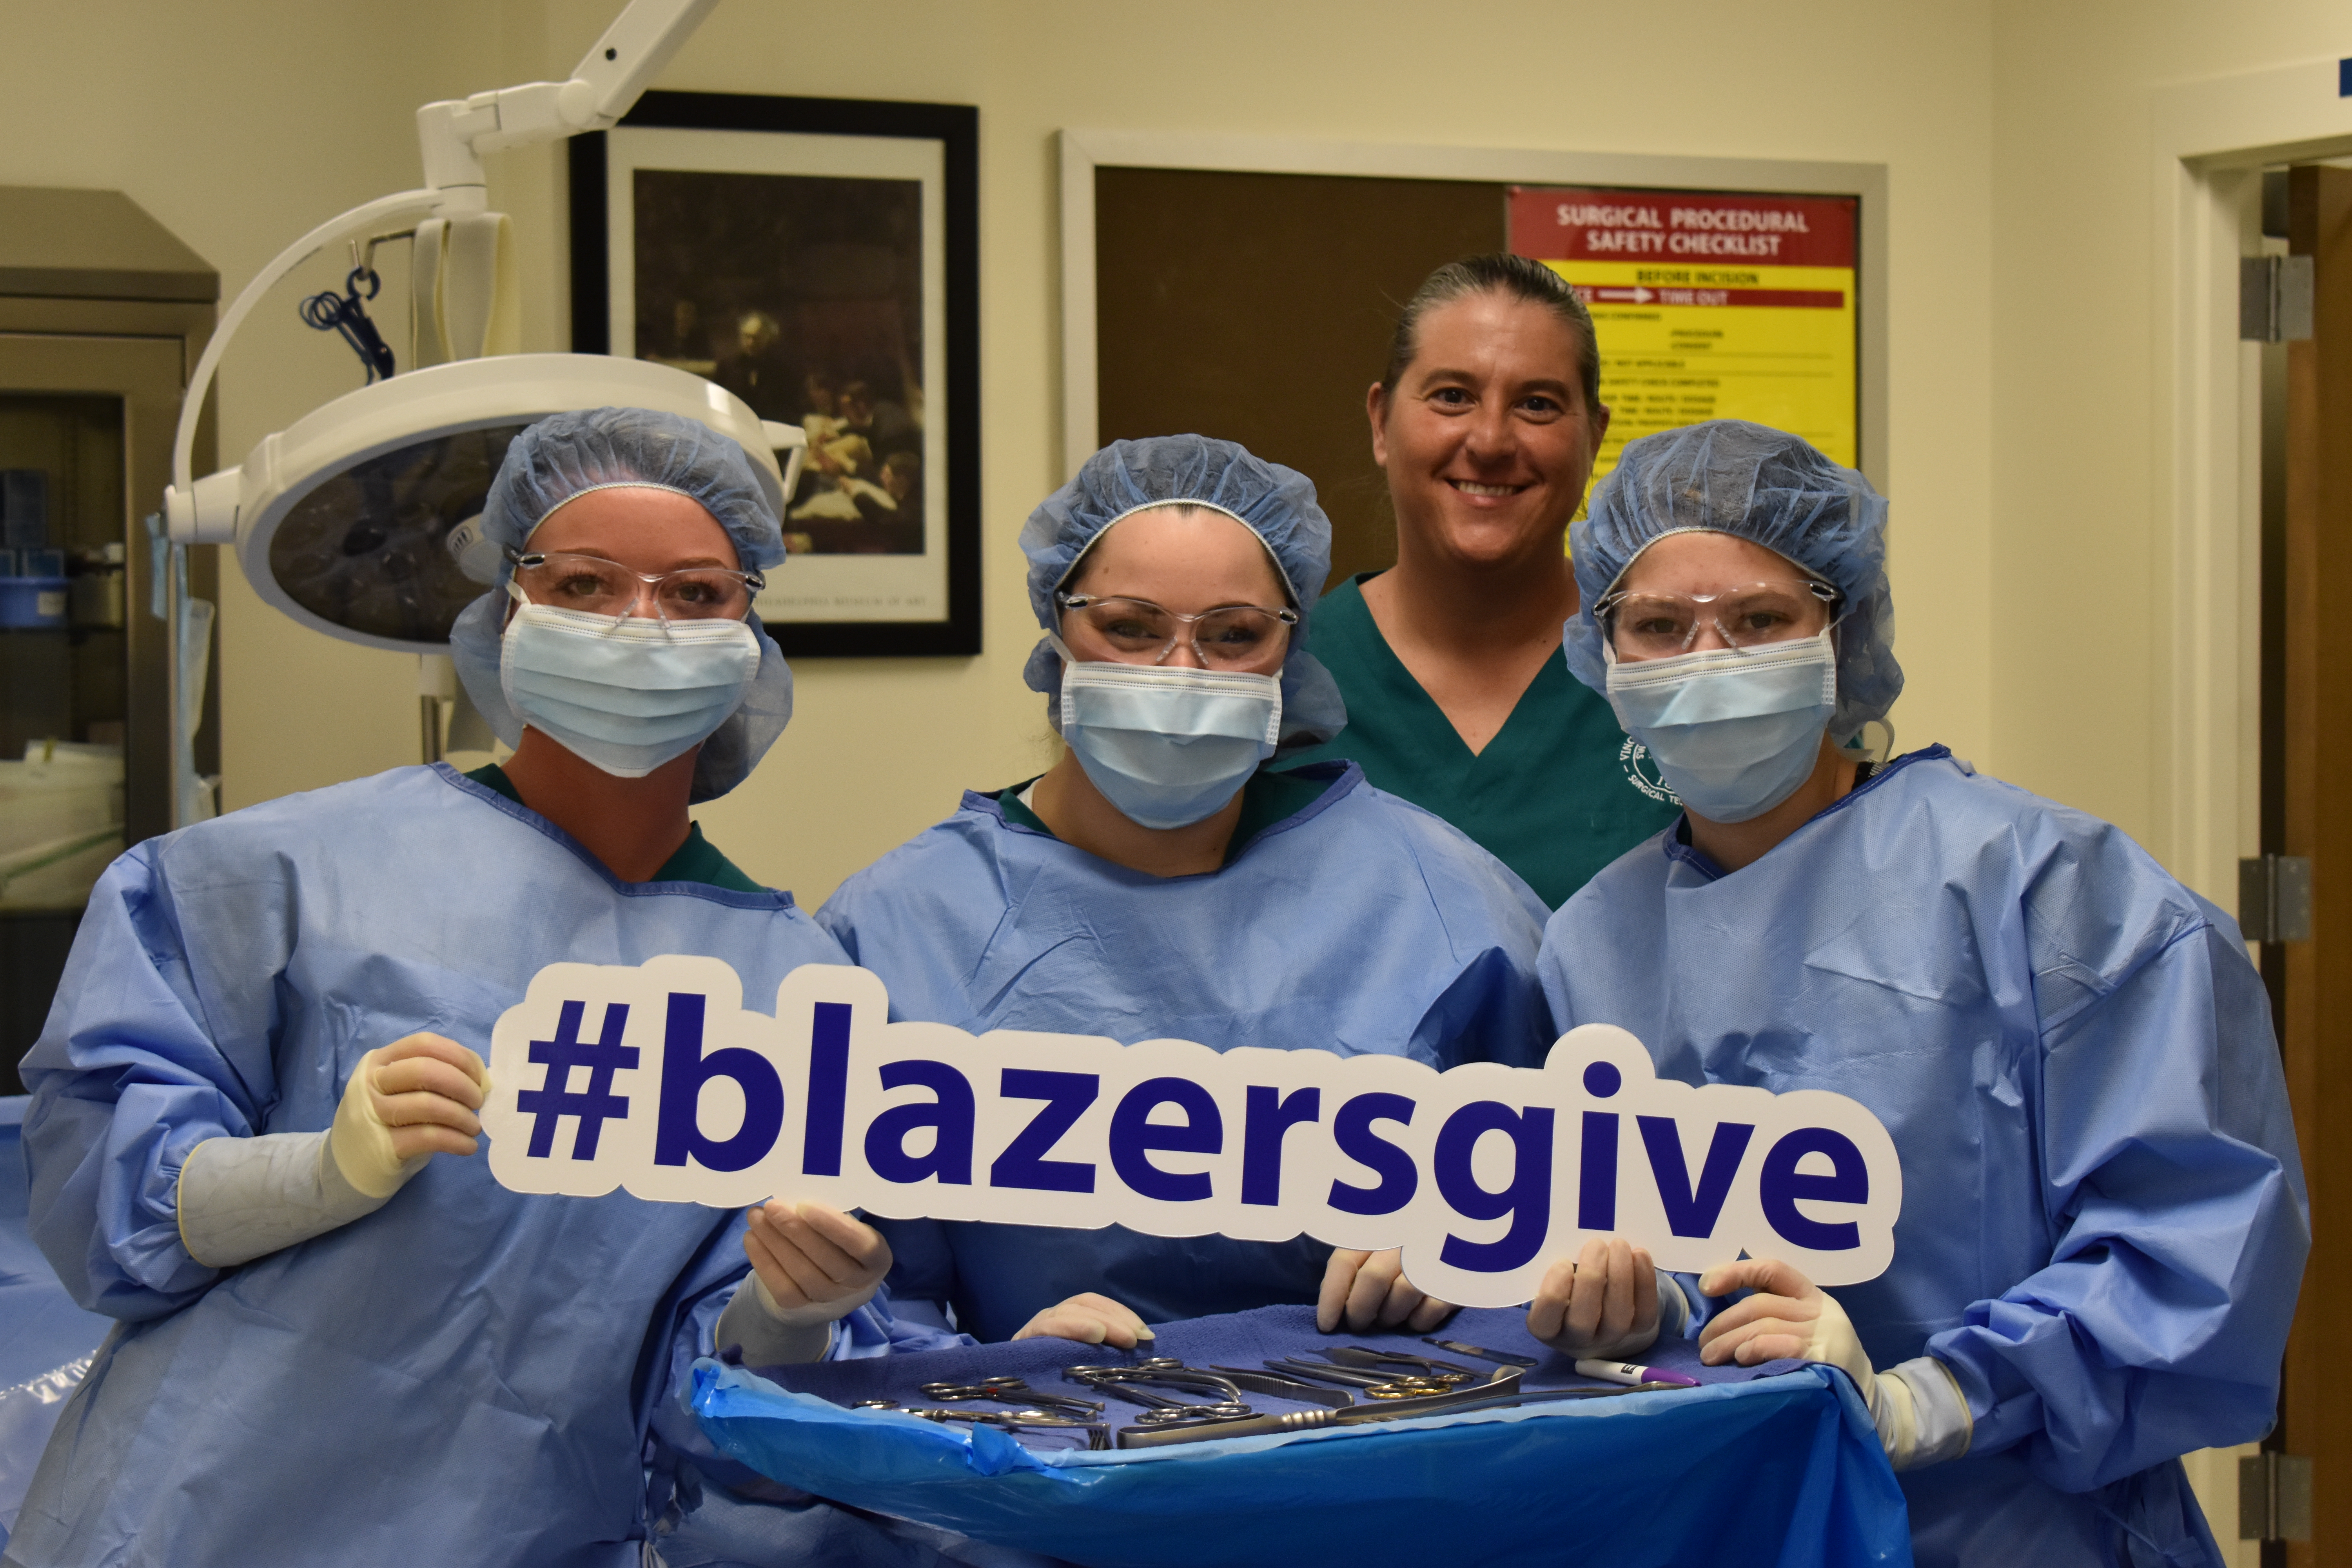 Three female Surgical Technology students and a female Surgical Technology professor pose with a #BlazersGive sign wearing surgical gowns, scrubs, masks and protective eyewear